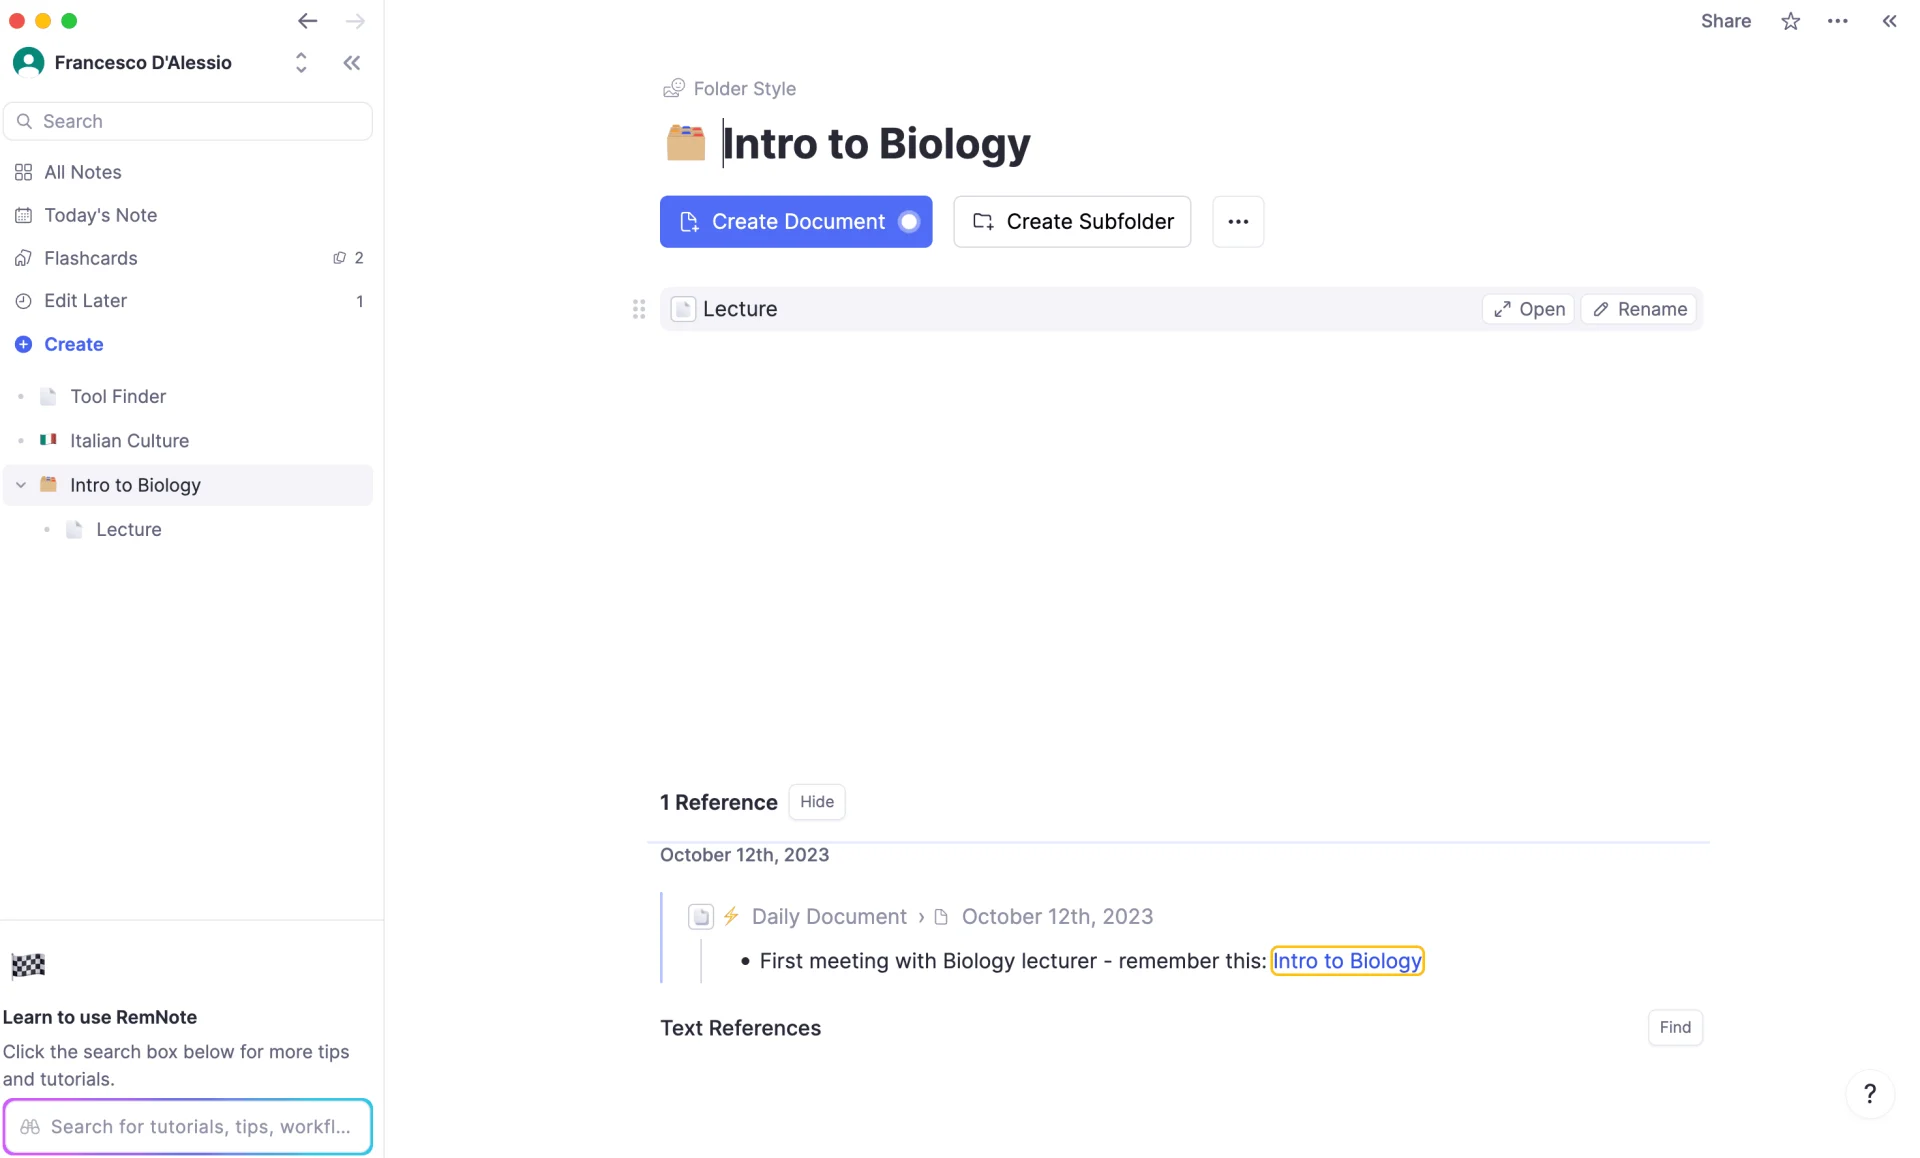 RemNote - New Note, Introduction to Biology